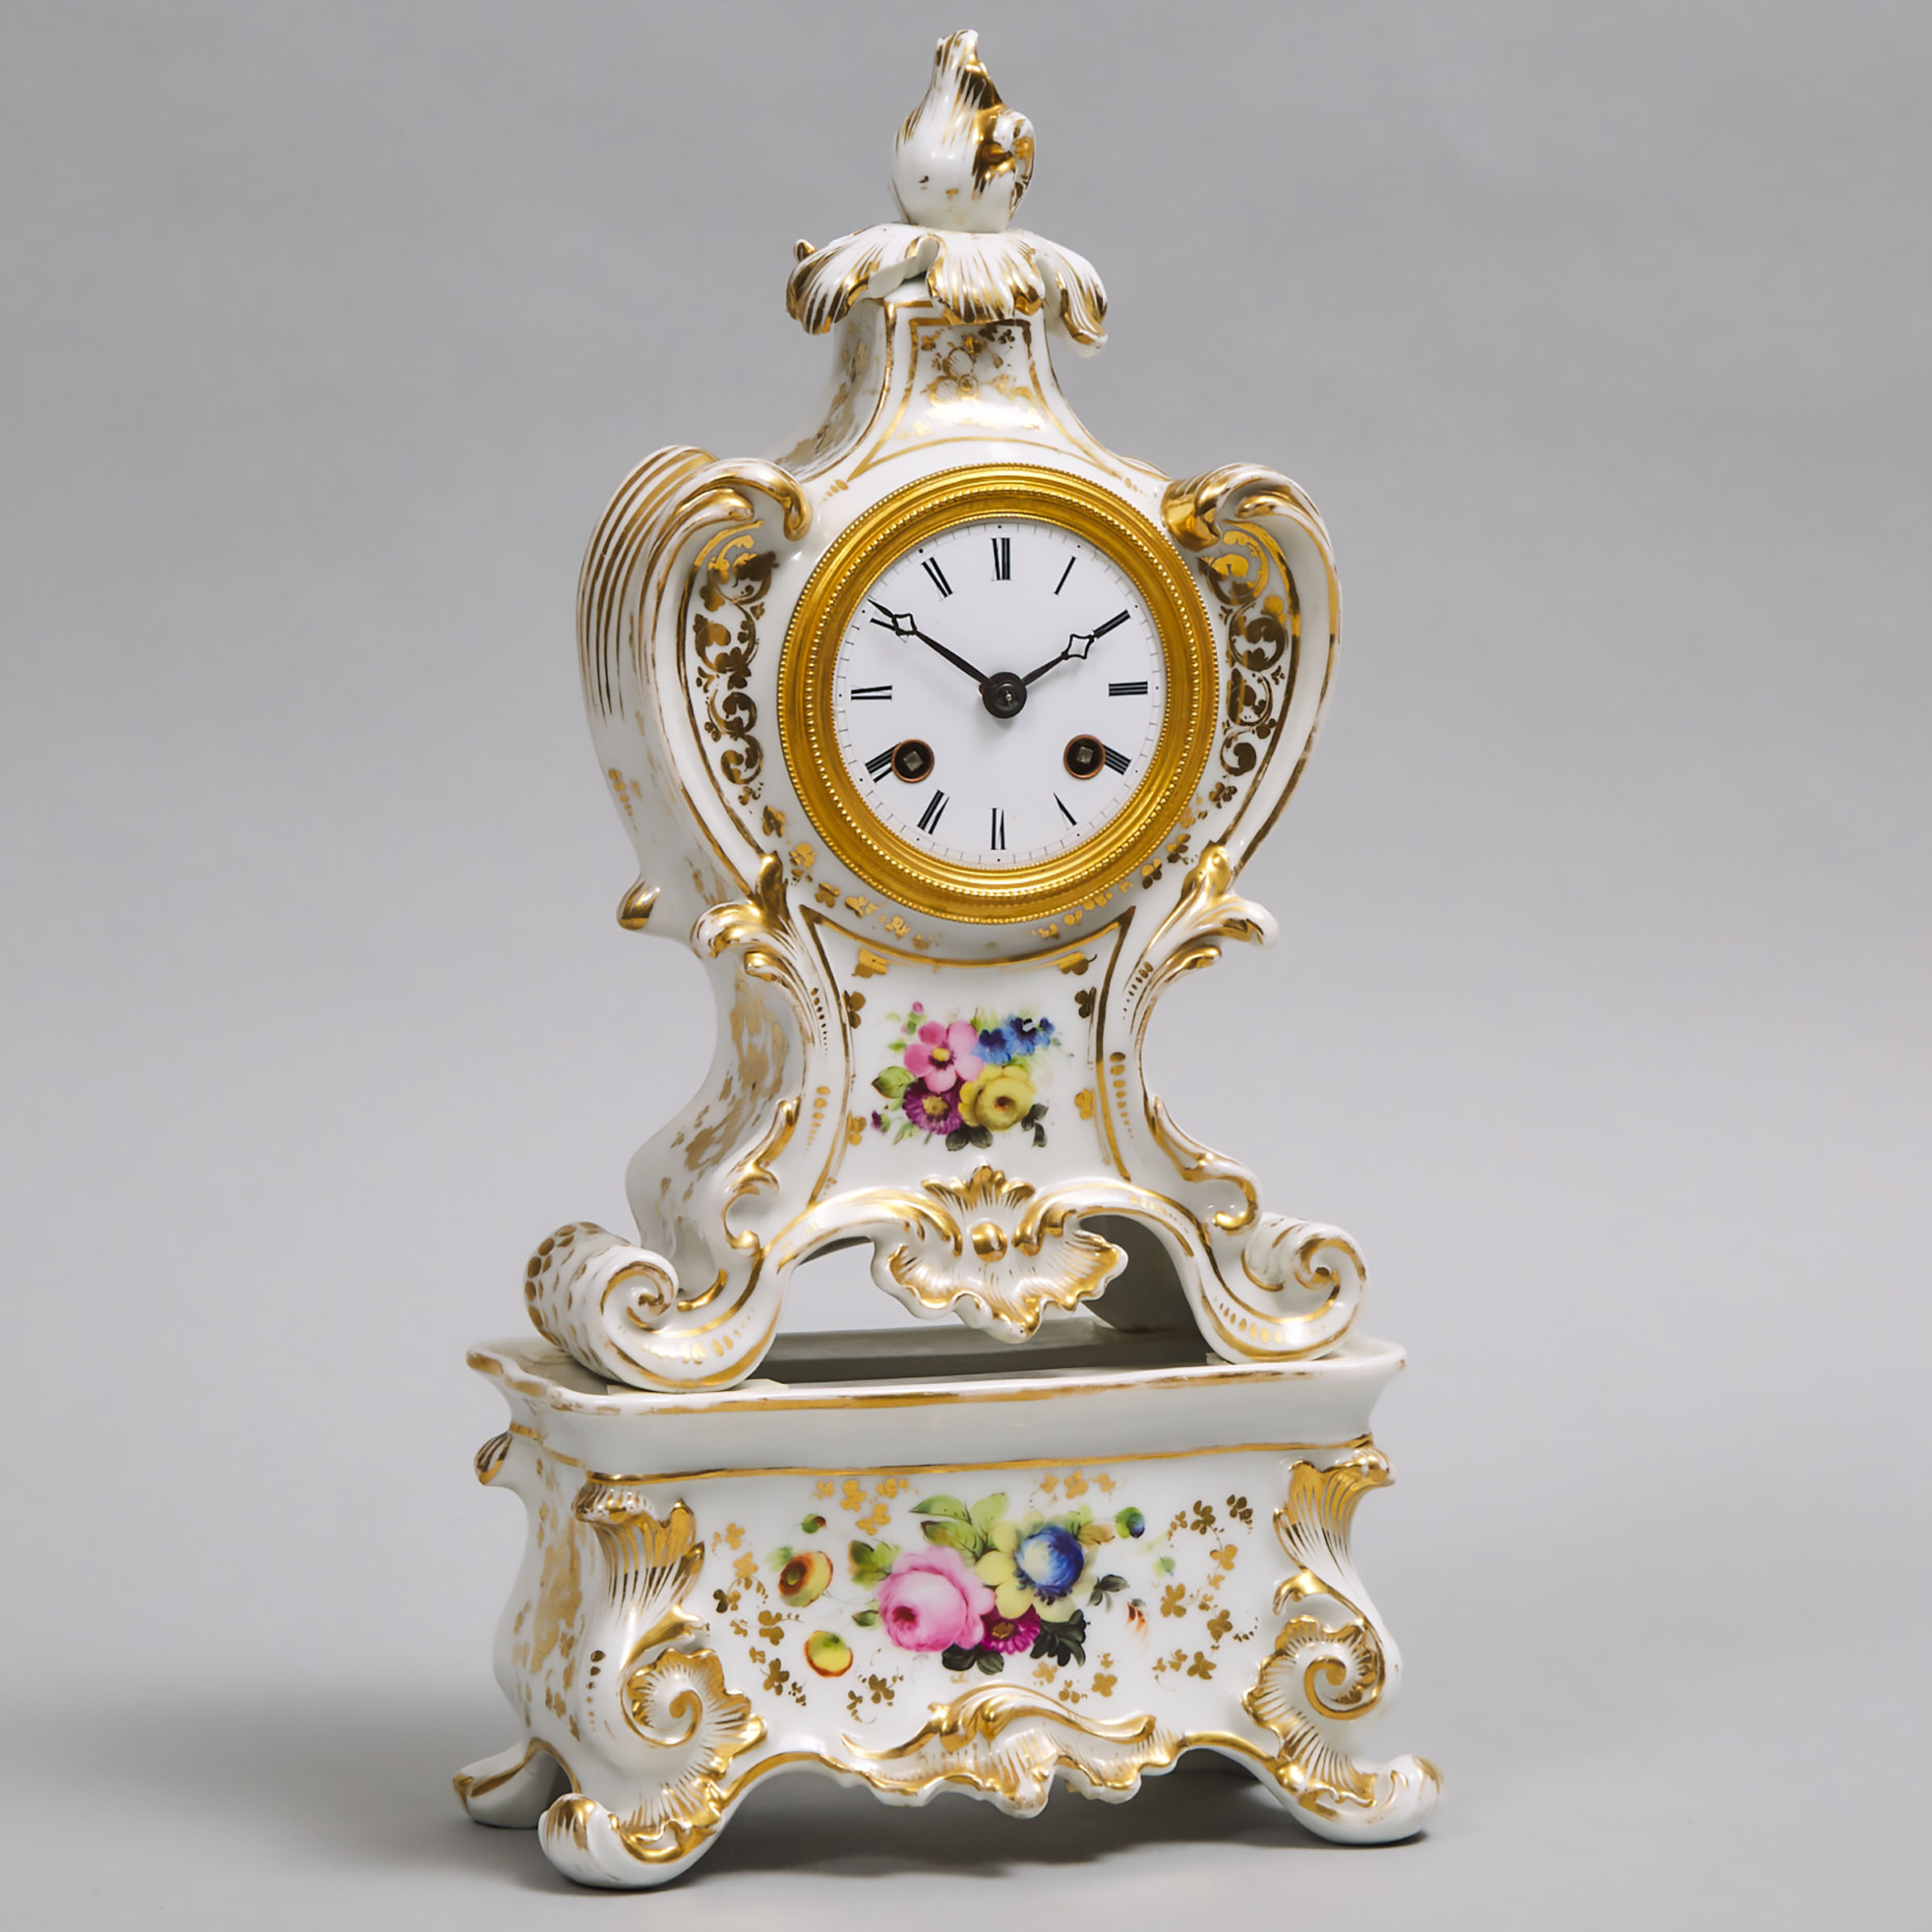 French Rococo Style Porcelain Mantle Clock, 19th/early 20th century